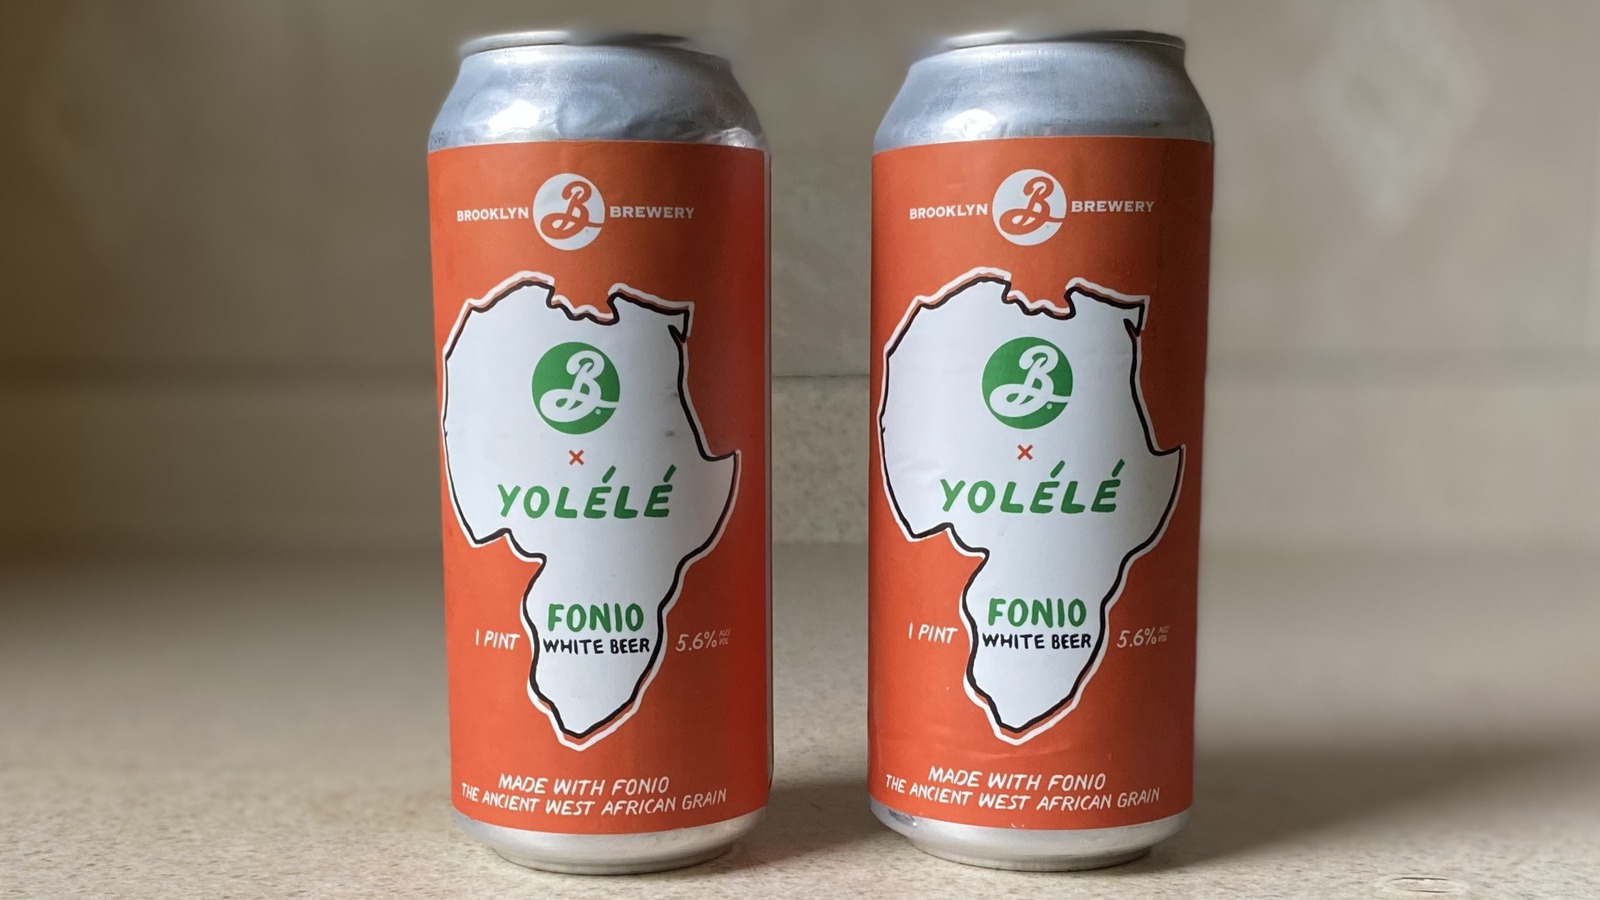 We Tried Brooklyn Brewery's New Yolélé Fonio White Beer. Here's How It Went